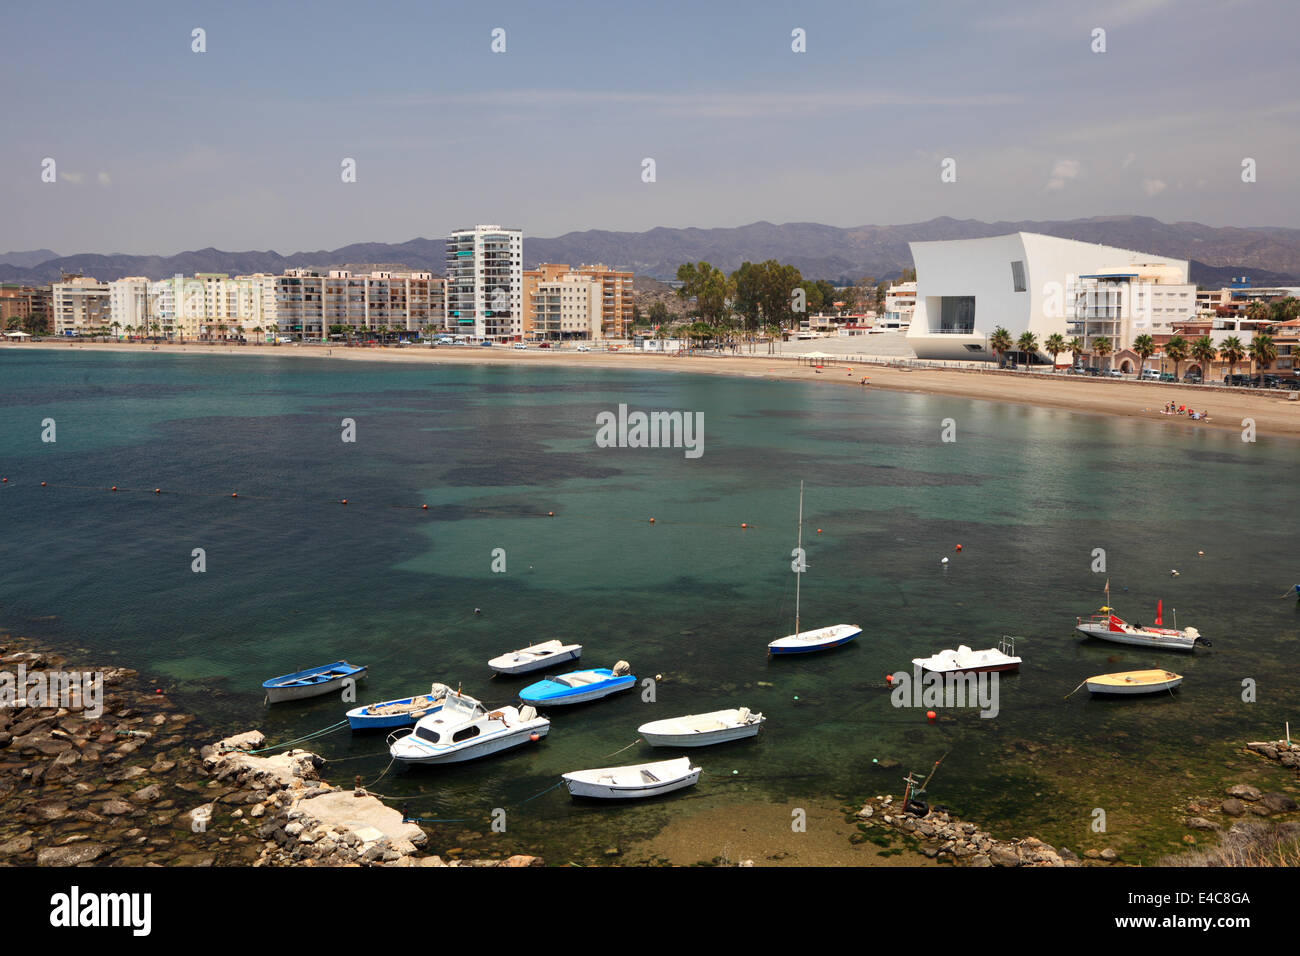 Mediterranean town Aguilas. Province of Murcia, Spain Stock Photo